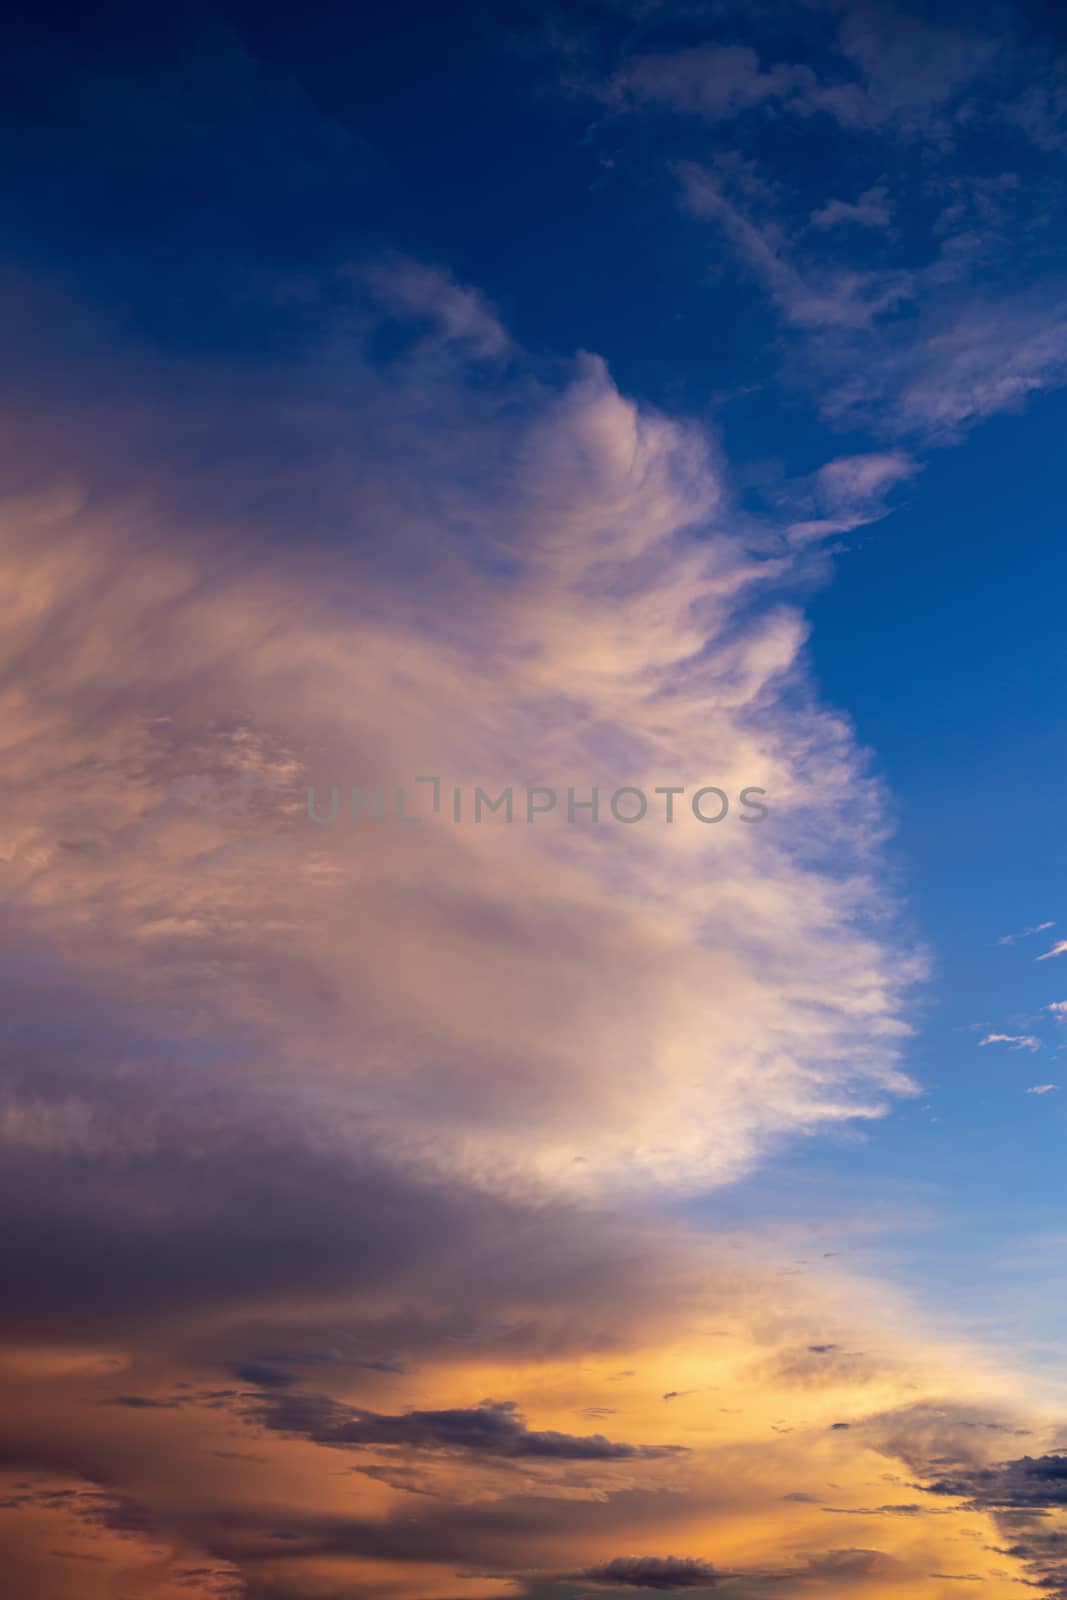 Colorful dramatic sky with cloud at sunset.